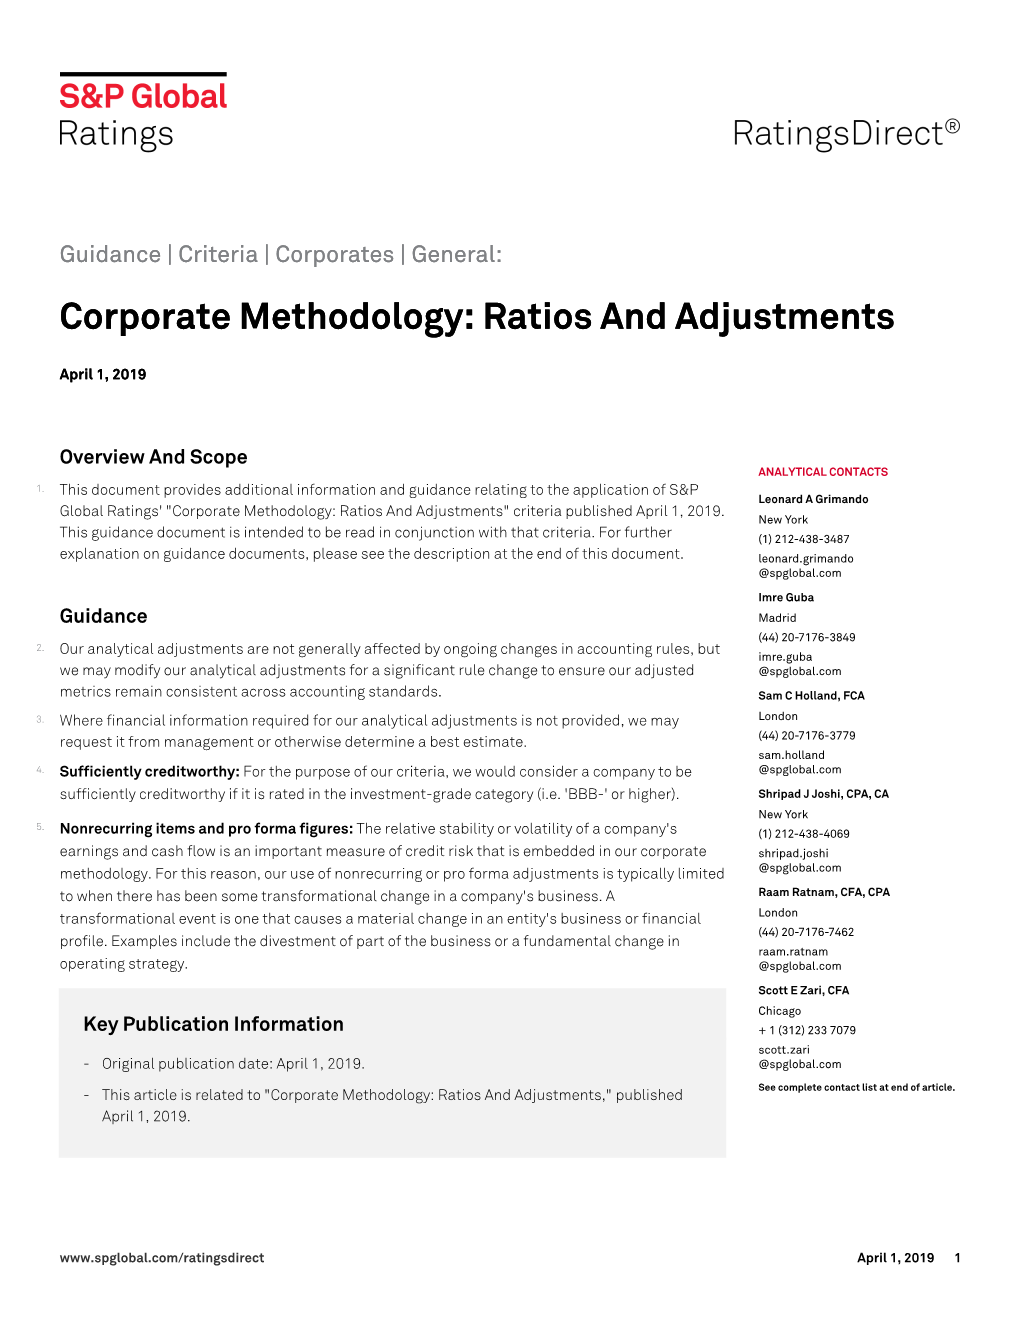 Corporate Methodology: Ratios and Adjustments